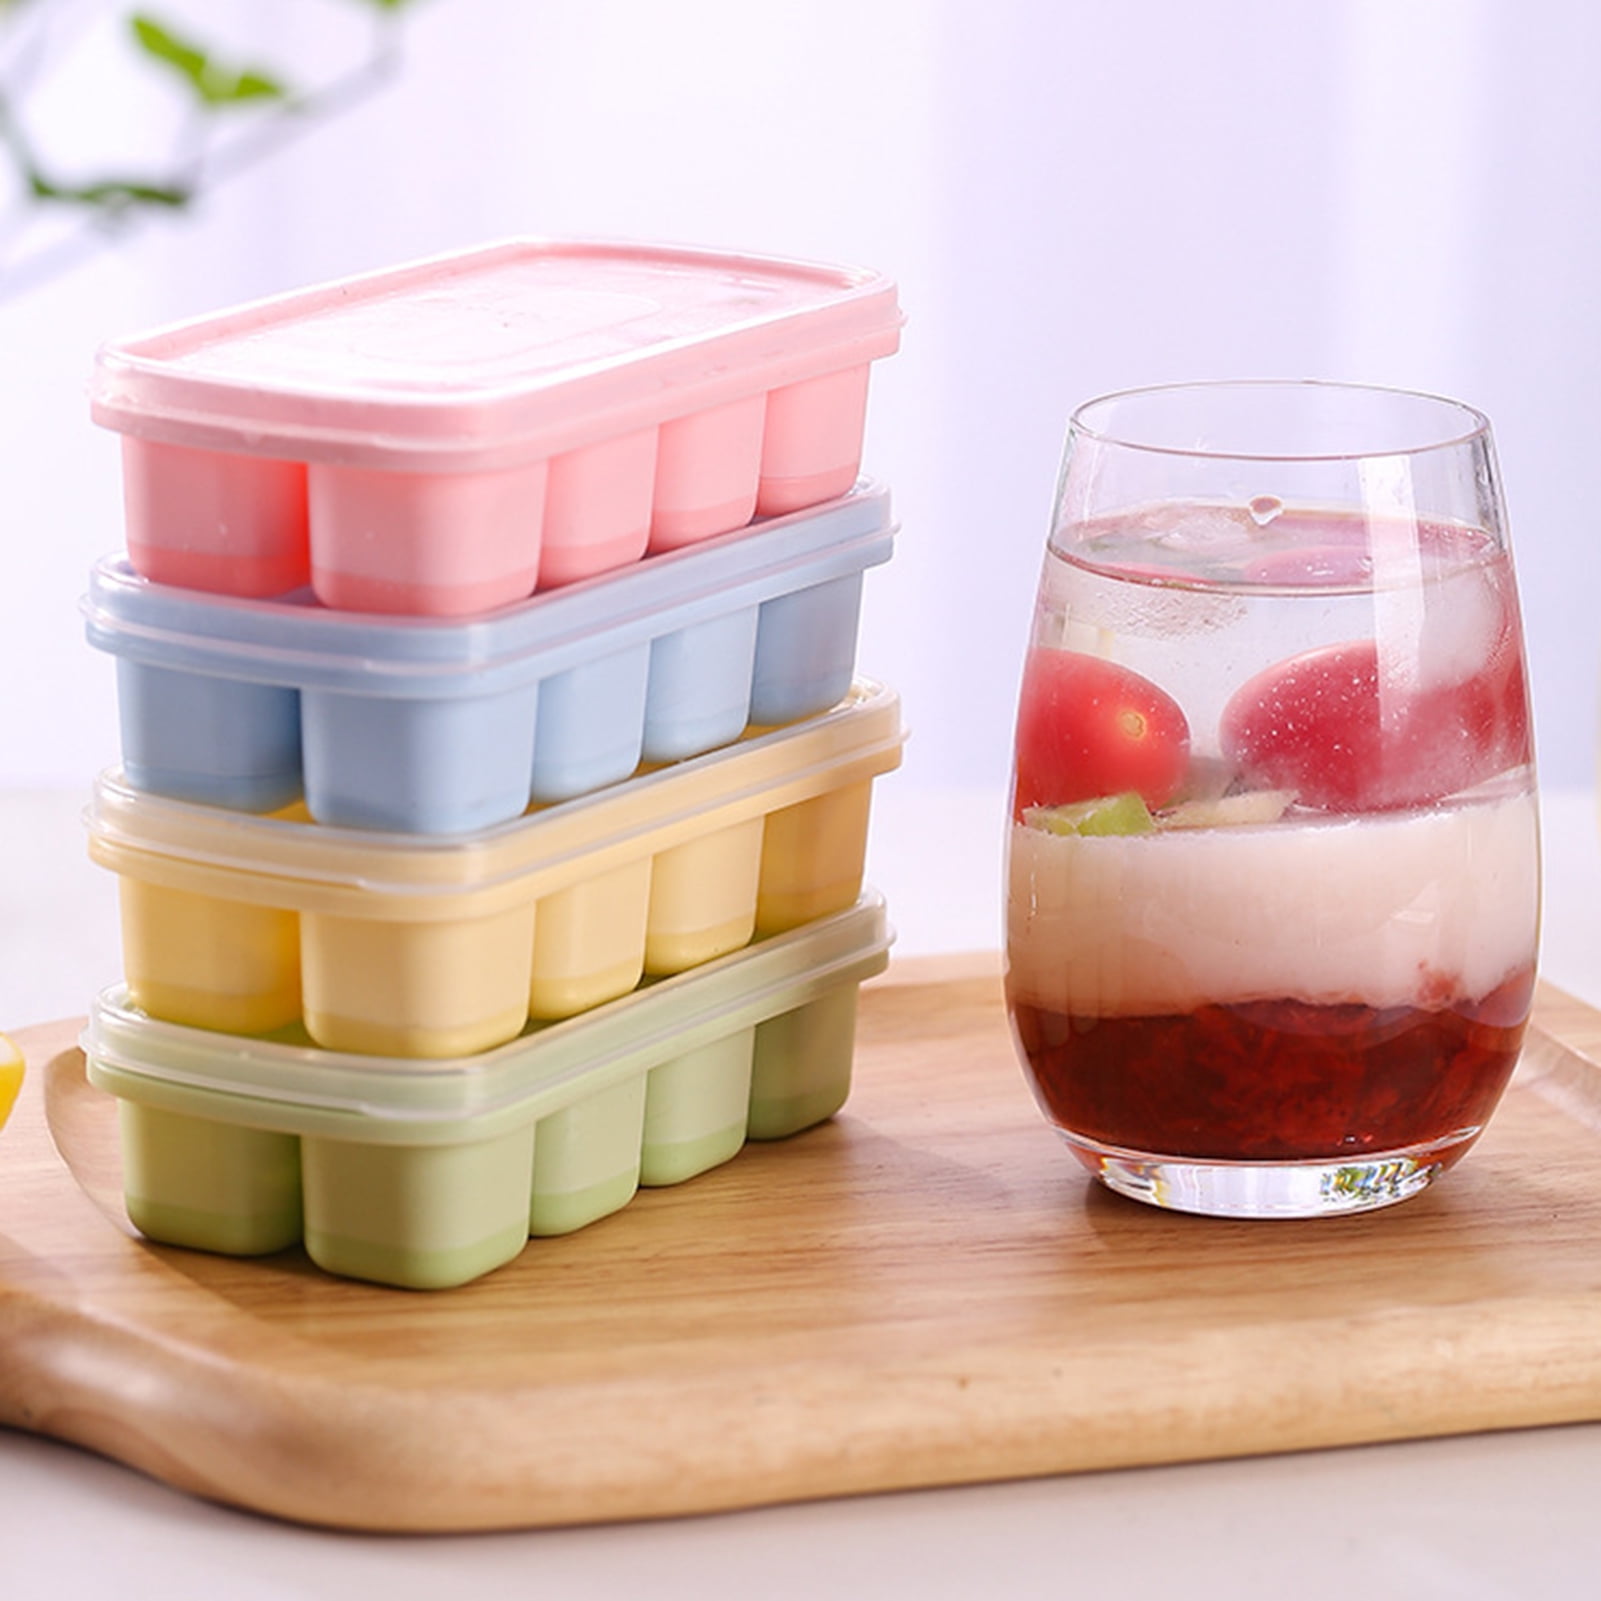 Suuchh Ice Cube Trays with Lid and Bin, Easy-Release Silicone & Flexible 3 * 14 Ice Trays for Freezer(Total 42 Cubes), 4 in1 Multi-function Set with Spill